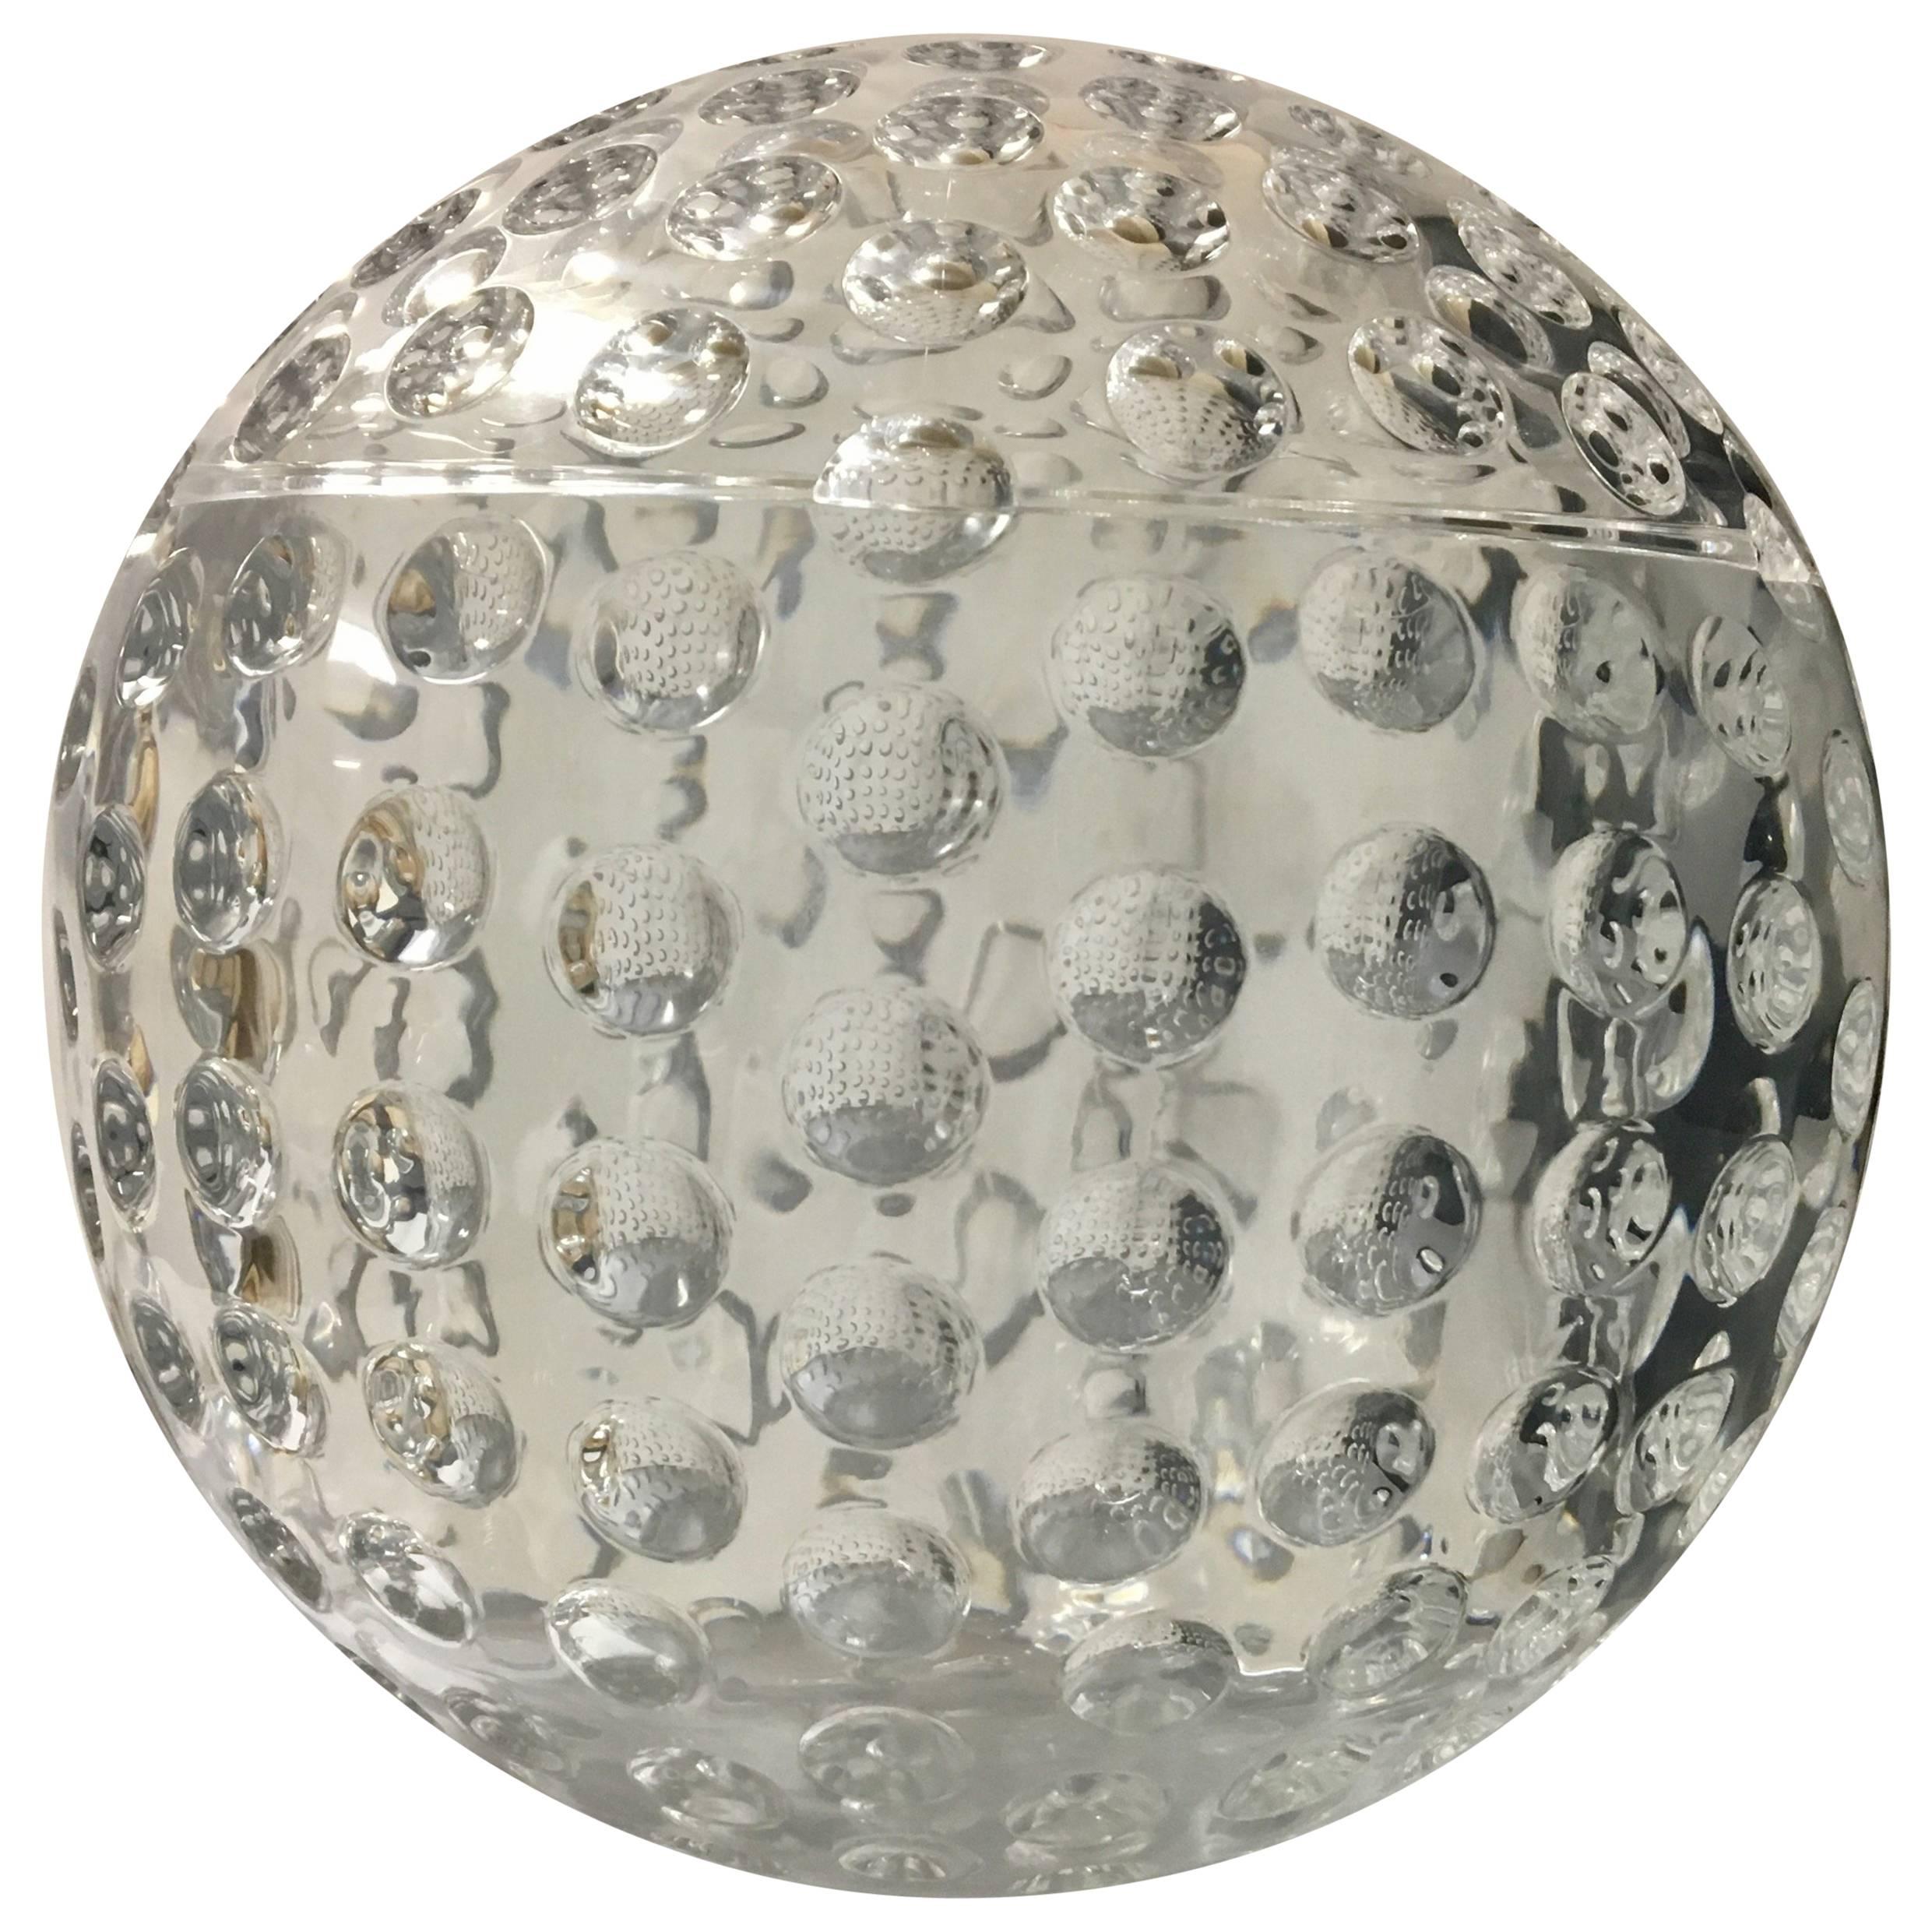 Spherical Lucite Ice Bucket Resembles a Large Golf Ball